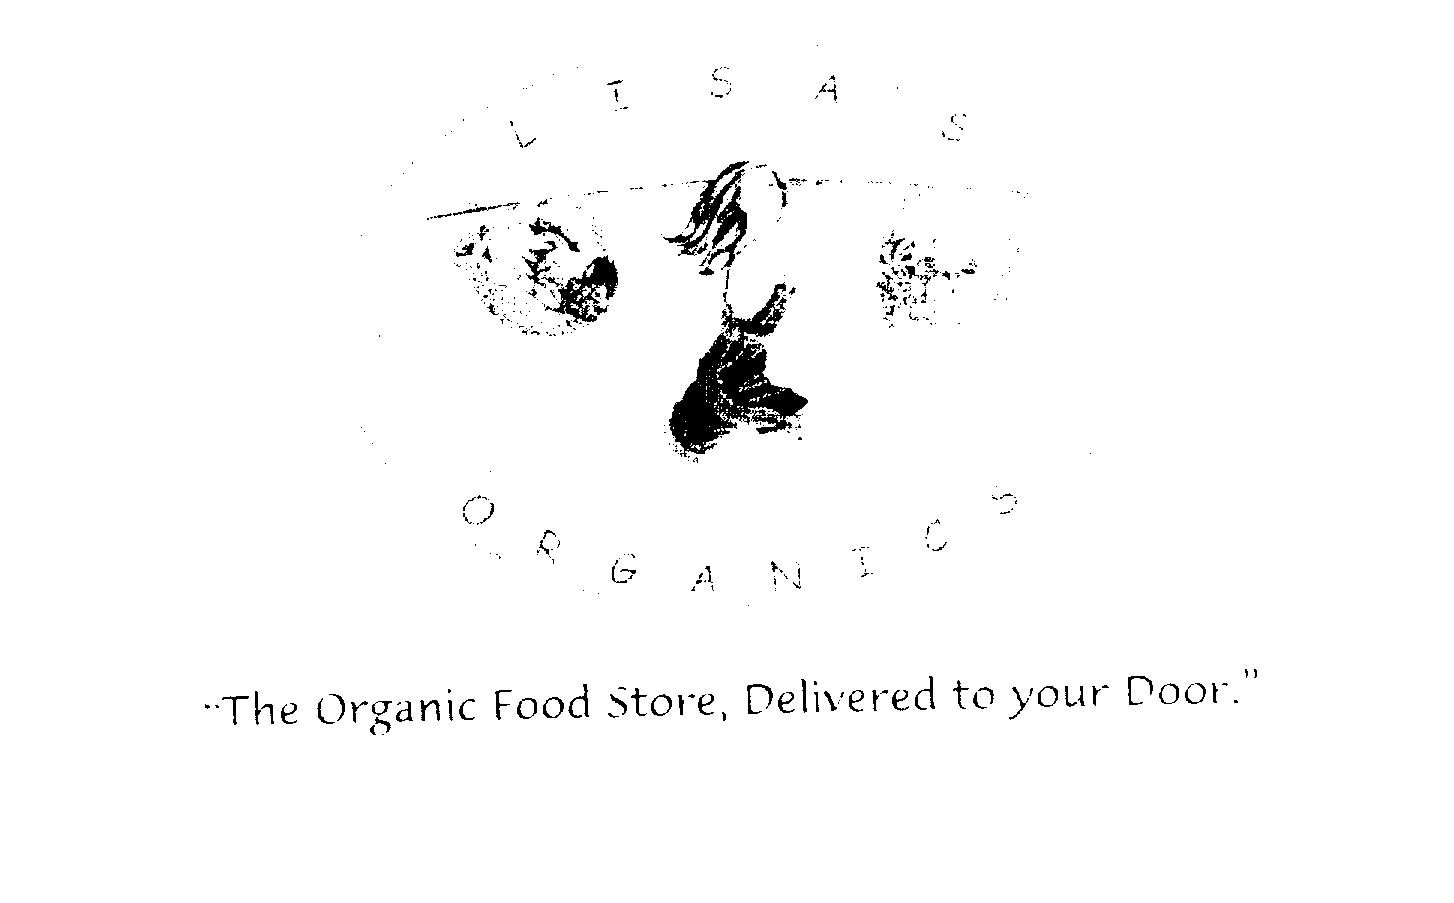  LISA'S ORGANICS "THE ORGANIC FOOD STORE, DELIVERED TO YOUR DOOR"